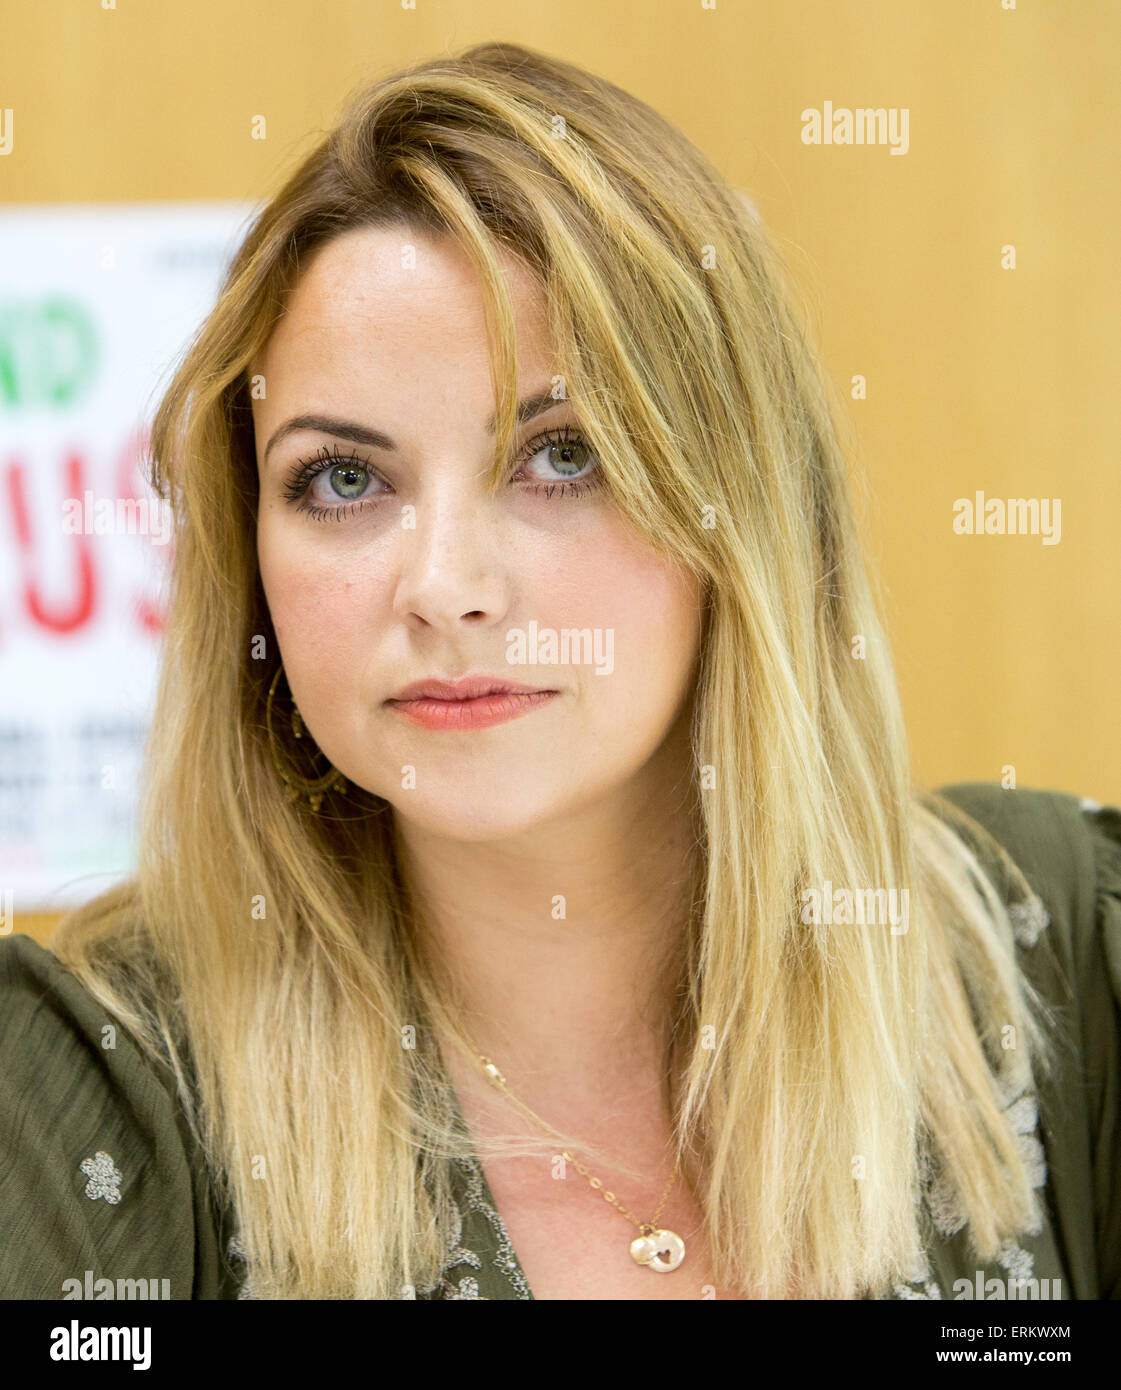 Welsh singer Charlotte Church gives a press conference ahead of the anti austerity March on June 20th Stock Photo